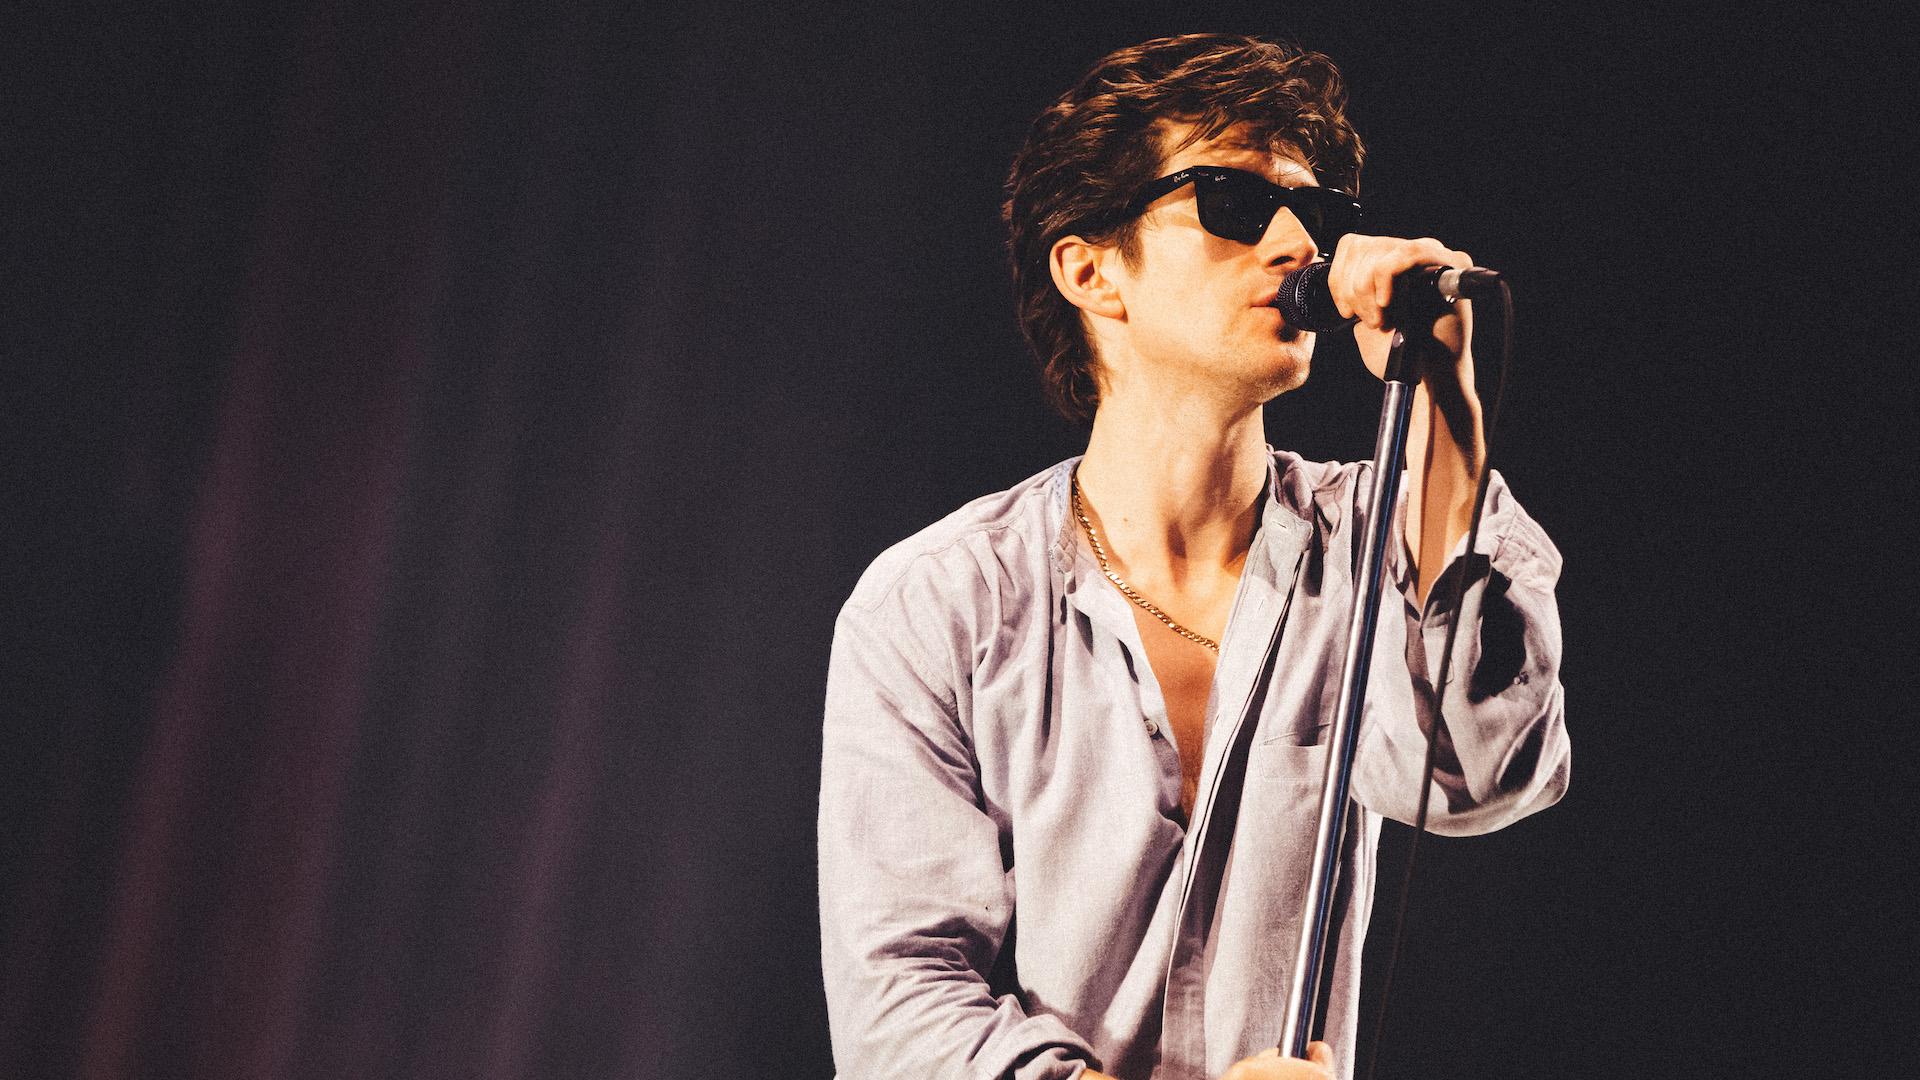 arctic monkeys singer alex turner leans into a microphone while singing and wearing an open pale blue shirt and sunglasses